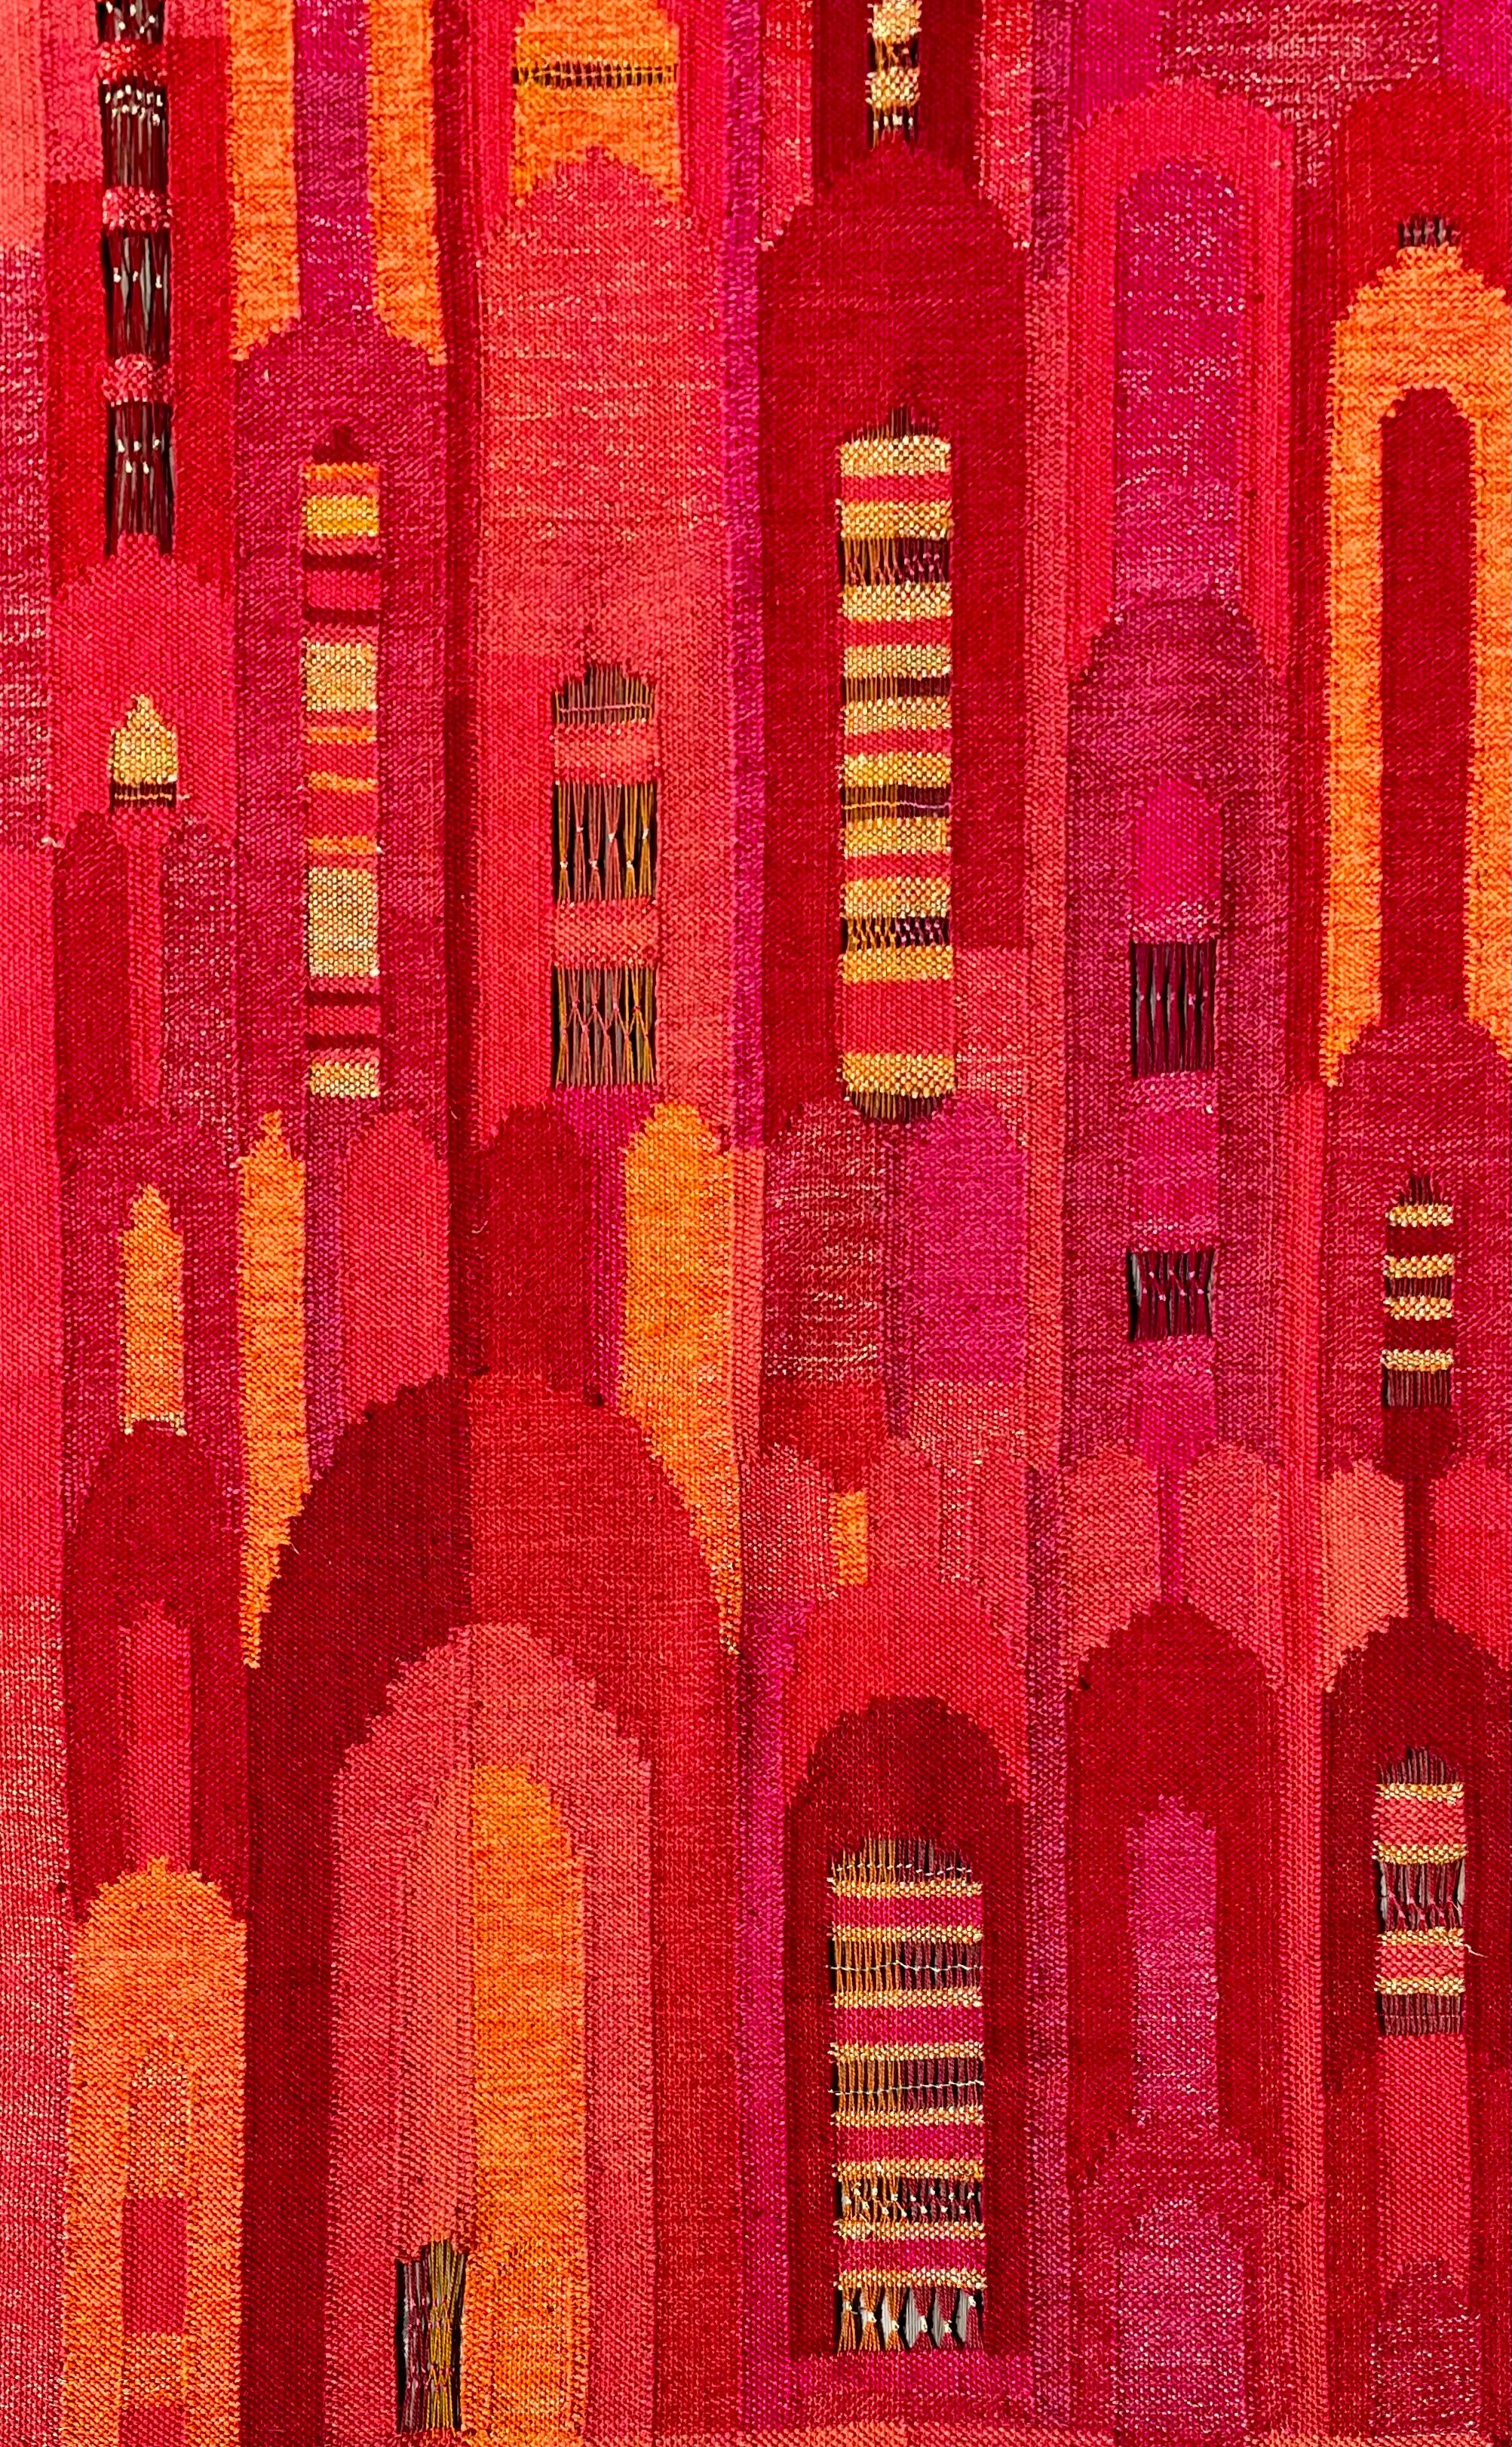 Hand-Woven Considerable Large Handwoven Swedish Red Color Range Tapestry by Irma Kronlund For Sale